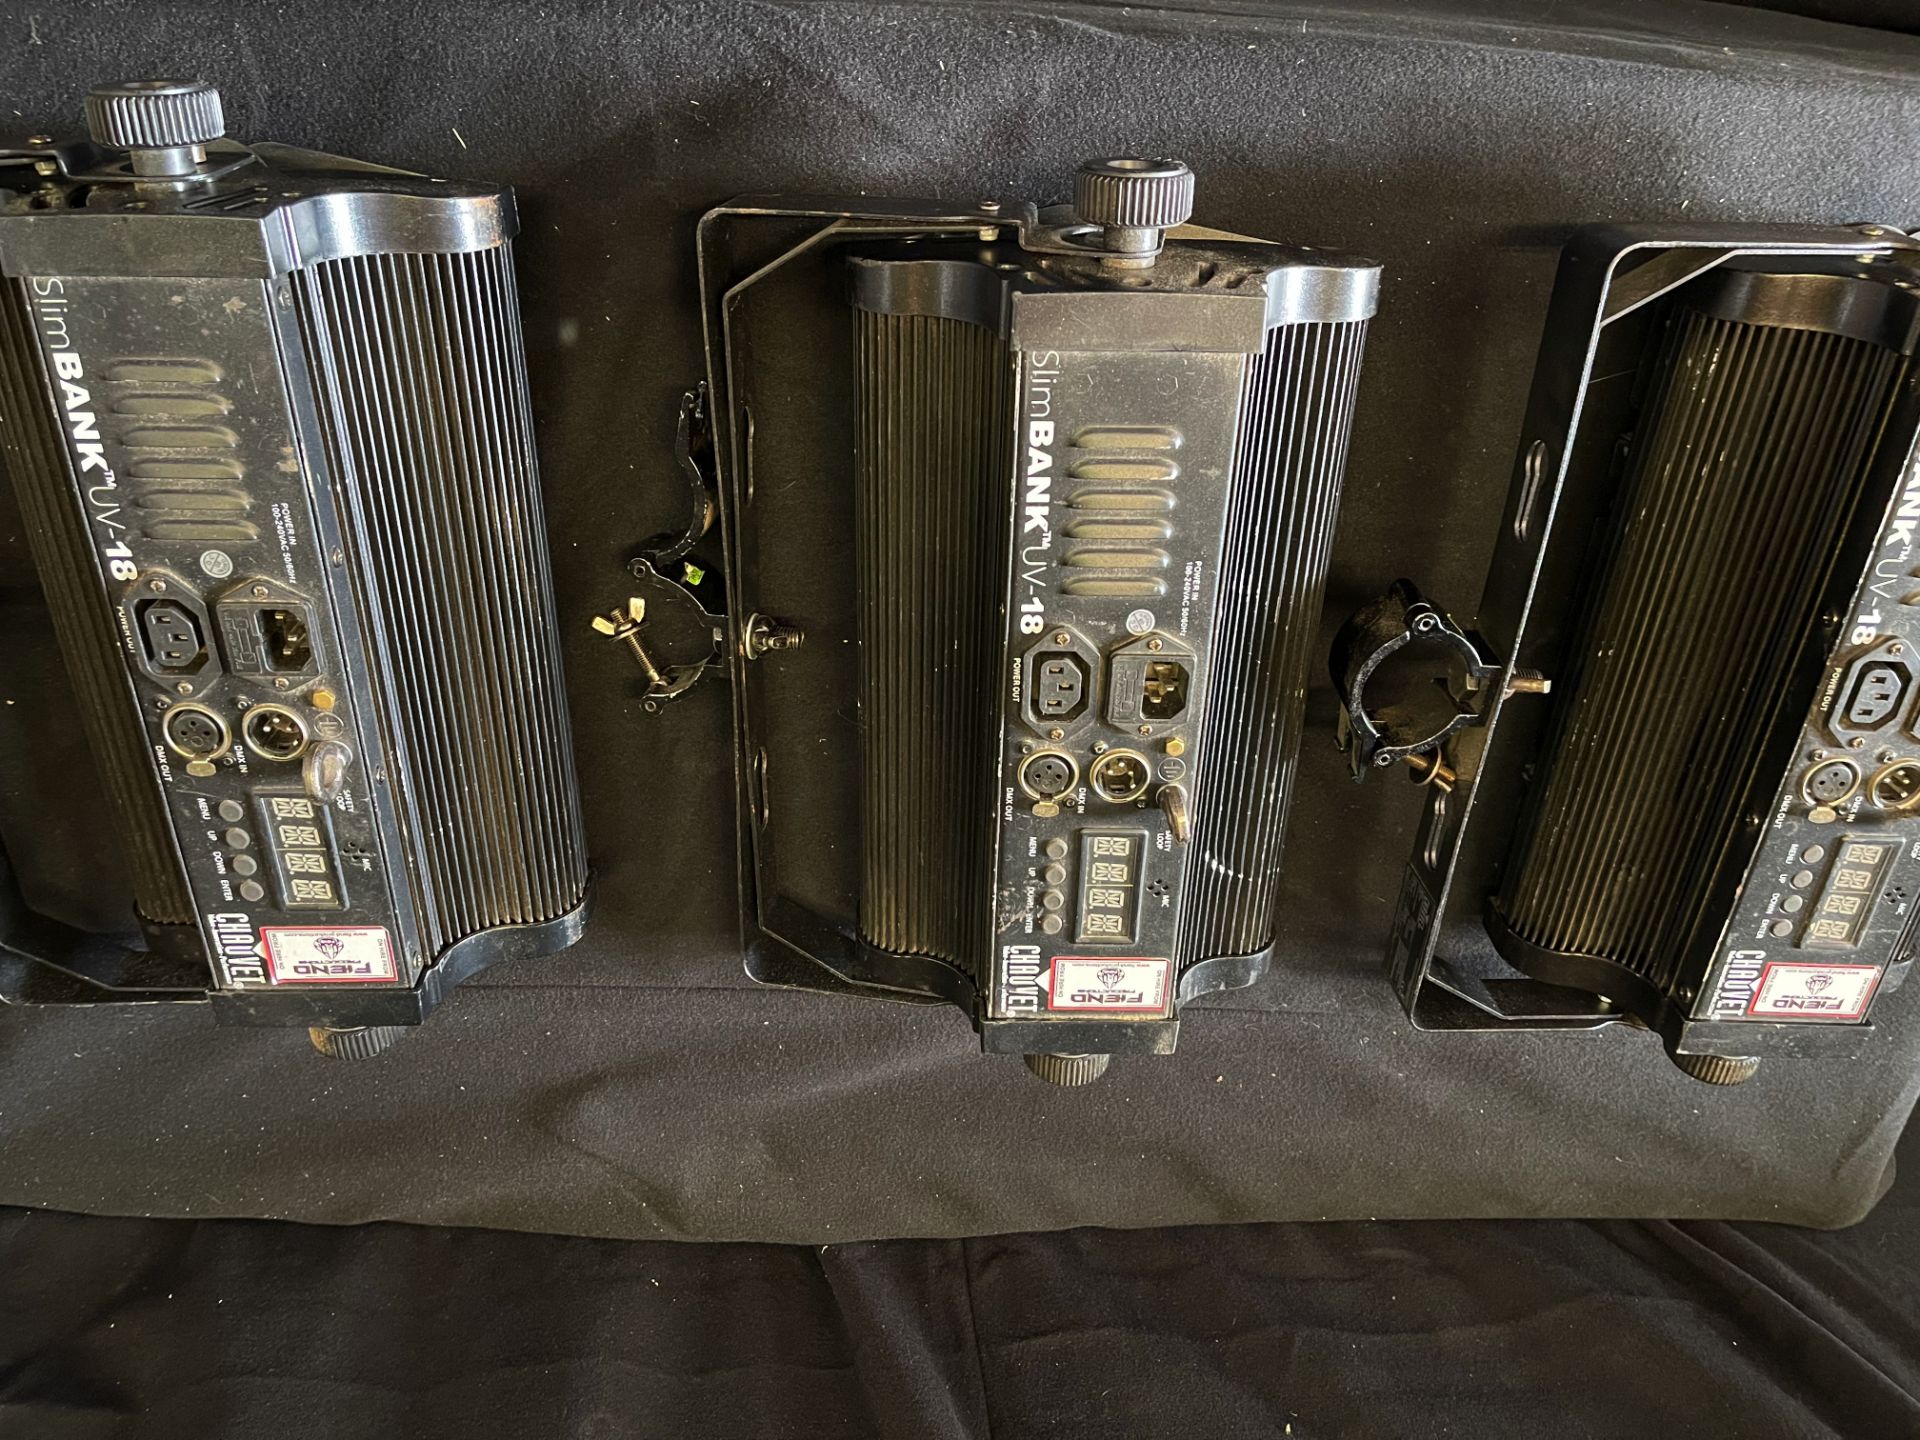 A Set of 4 Chauvet Slimbank UV LED Floodlights, good condition, not tested. - Image 3 of 3